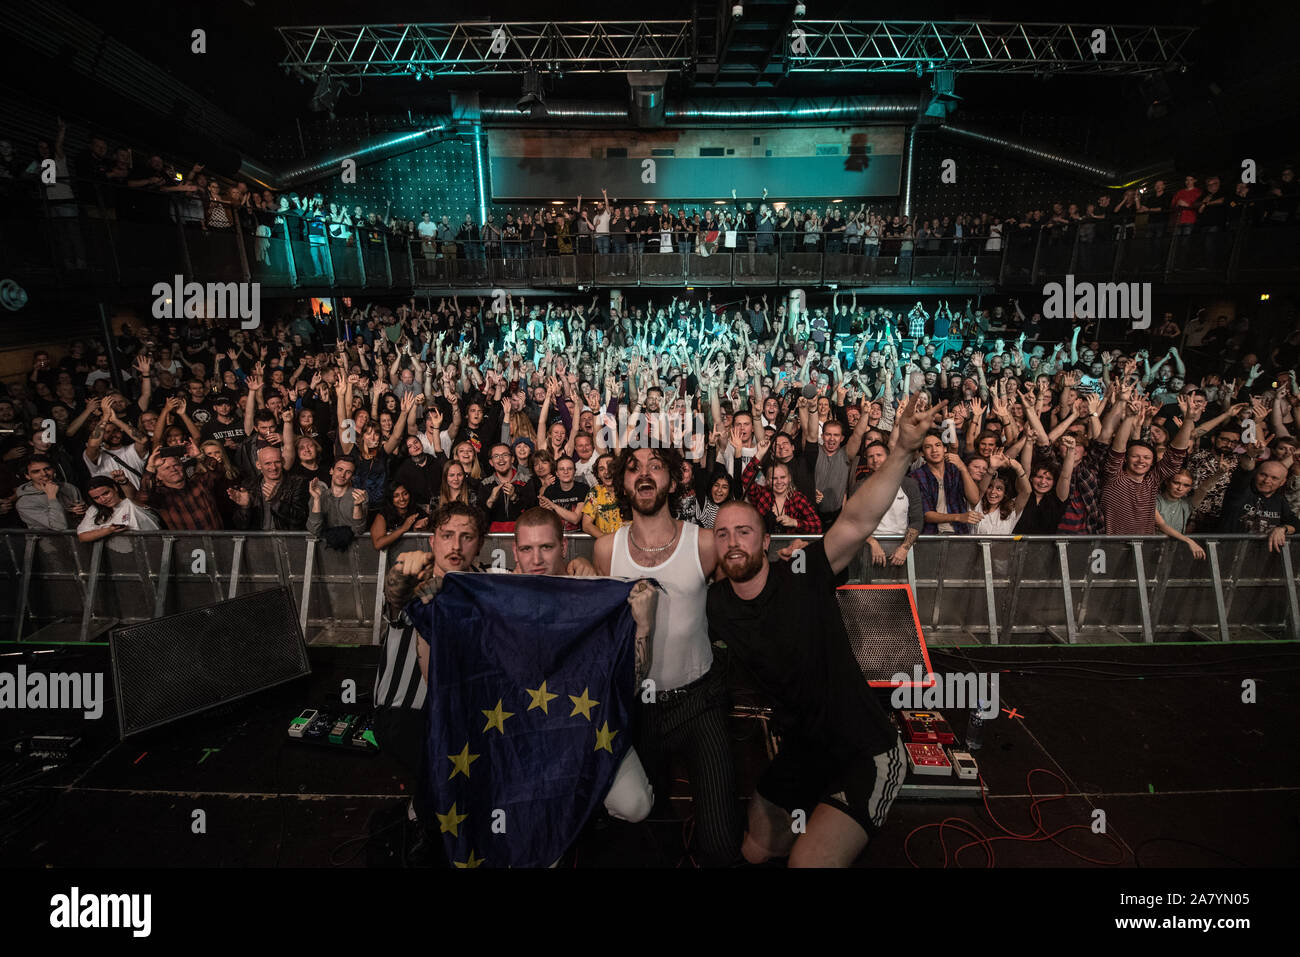 Copenhagen, Denmark. 03rd, November 2019. The English rock band Kid Kapichi performs a live concert at Amager Bio in Copenhagen. Here the band is seen on stage with a EU flag after the show. (Photo credit: Gonzales Photo - Joe Miller). Stock Photo